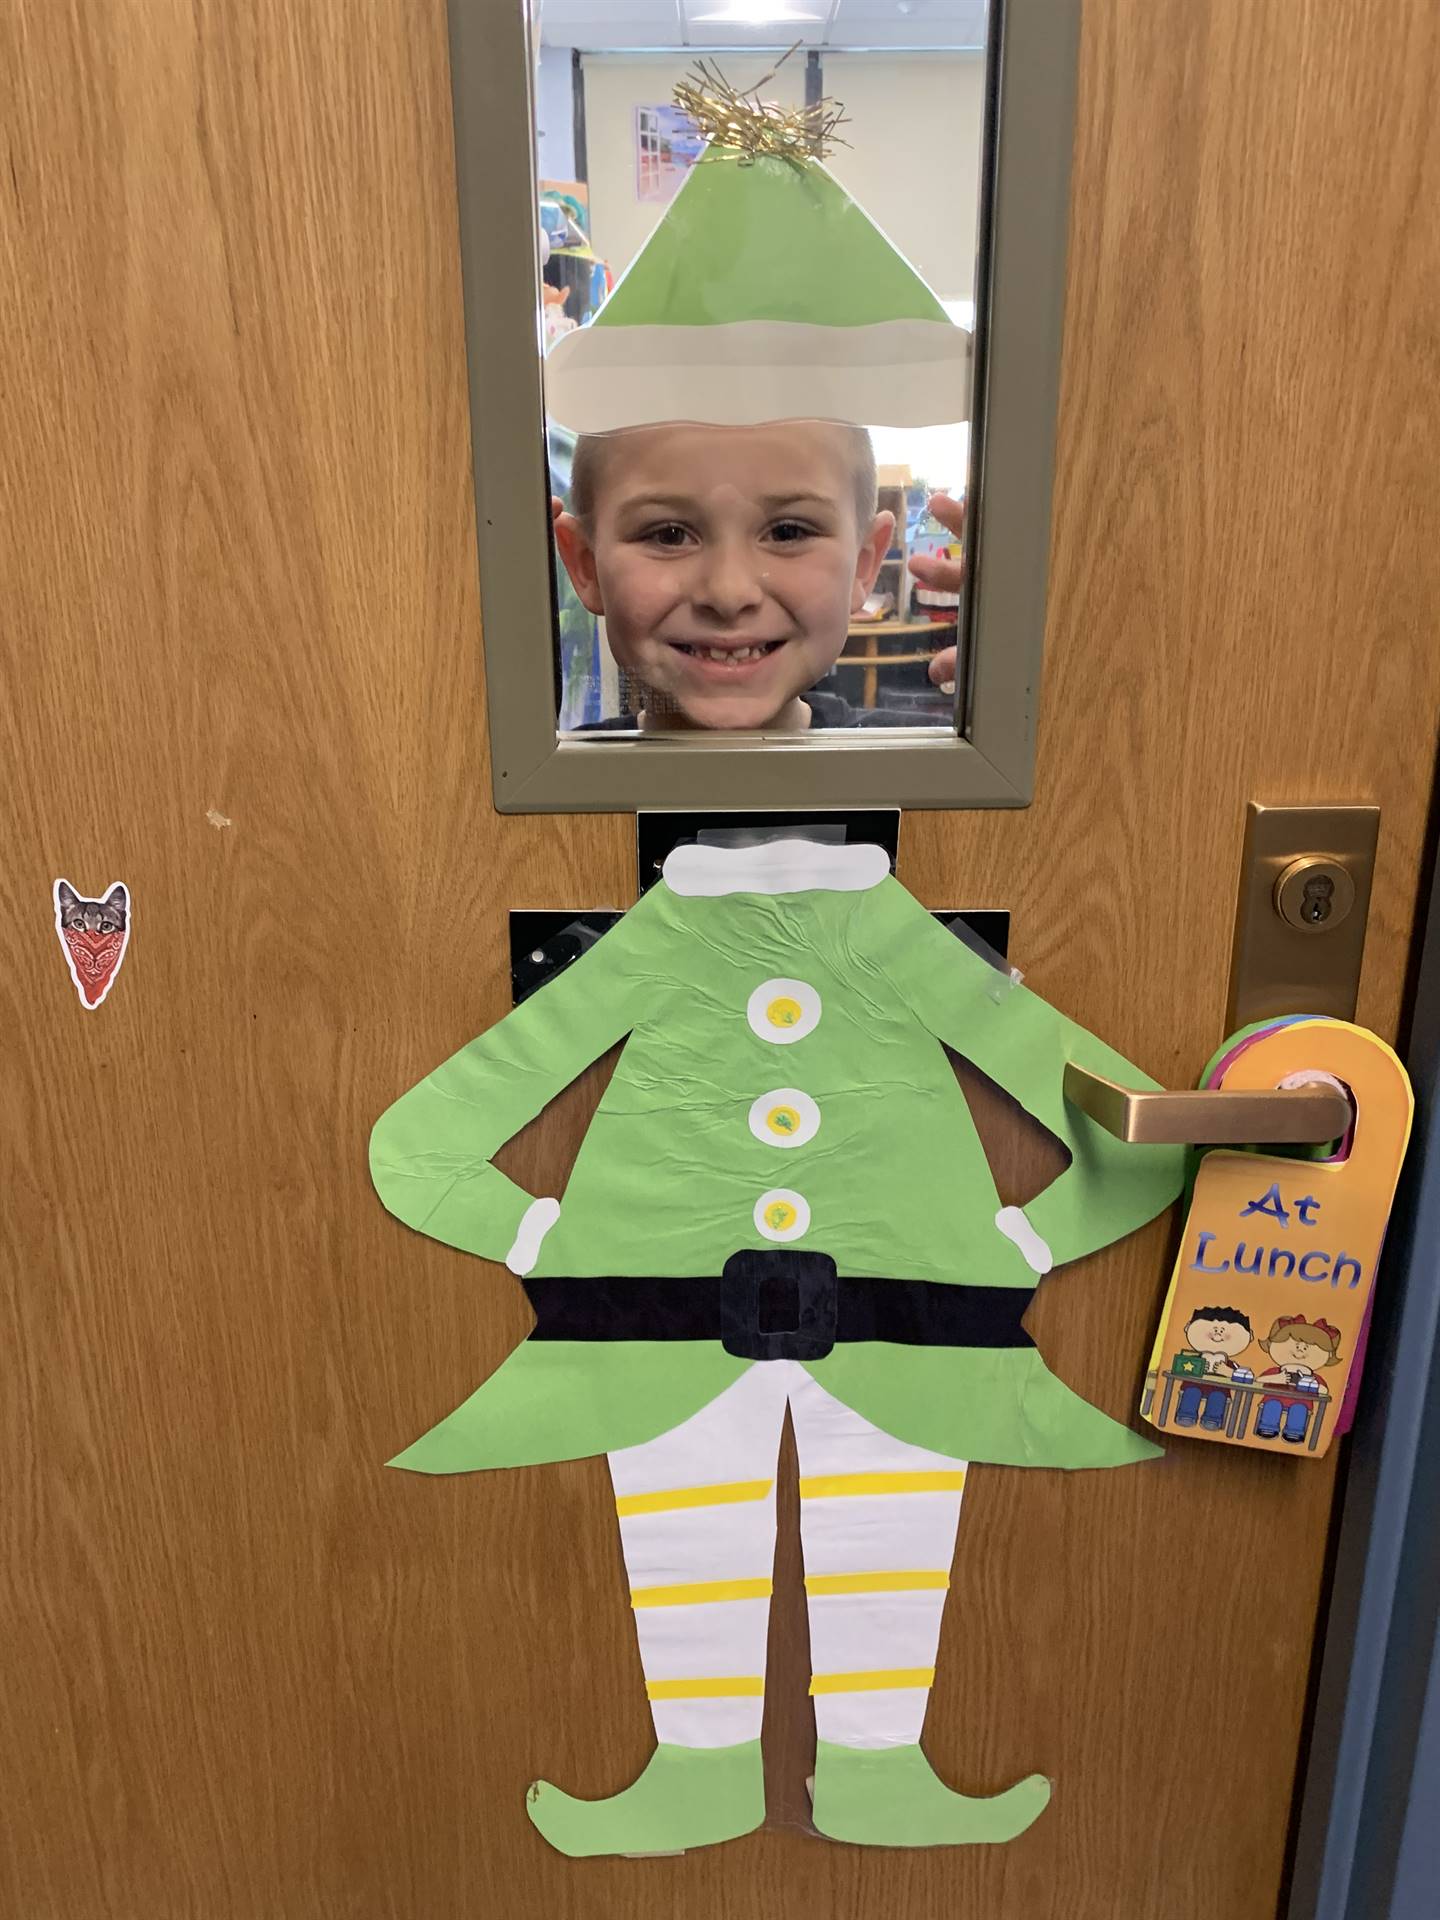 student with green elf suit on peeking through the window.